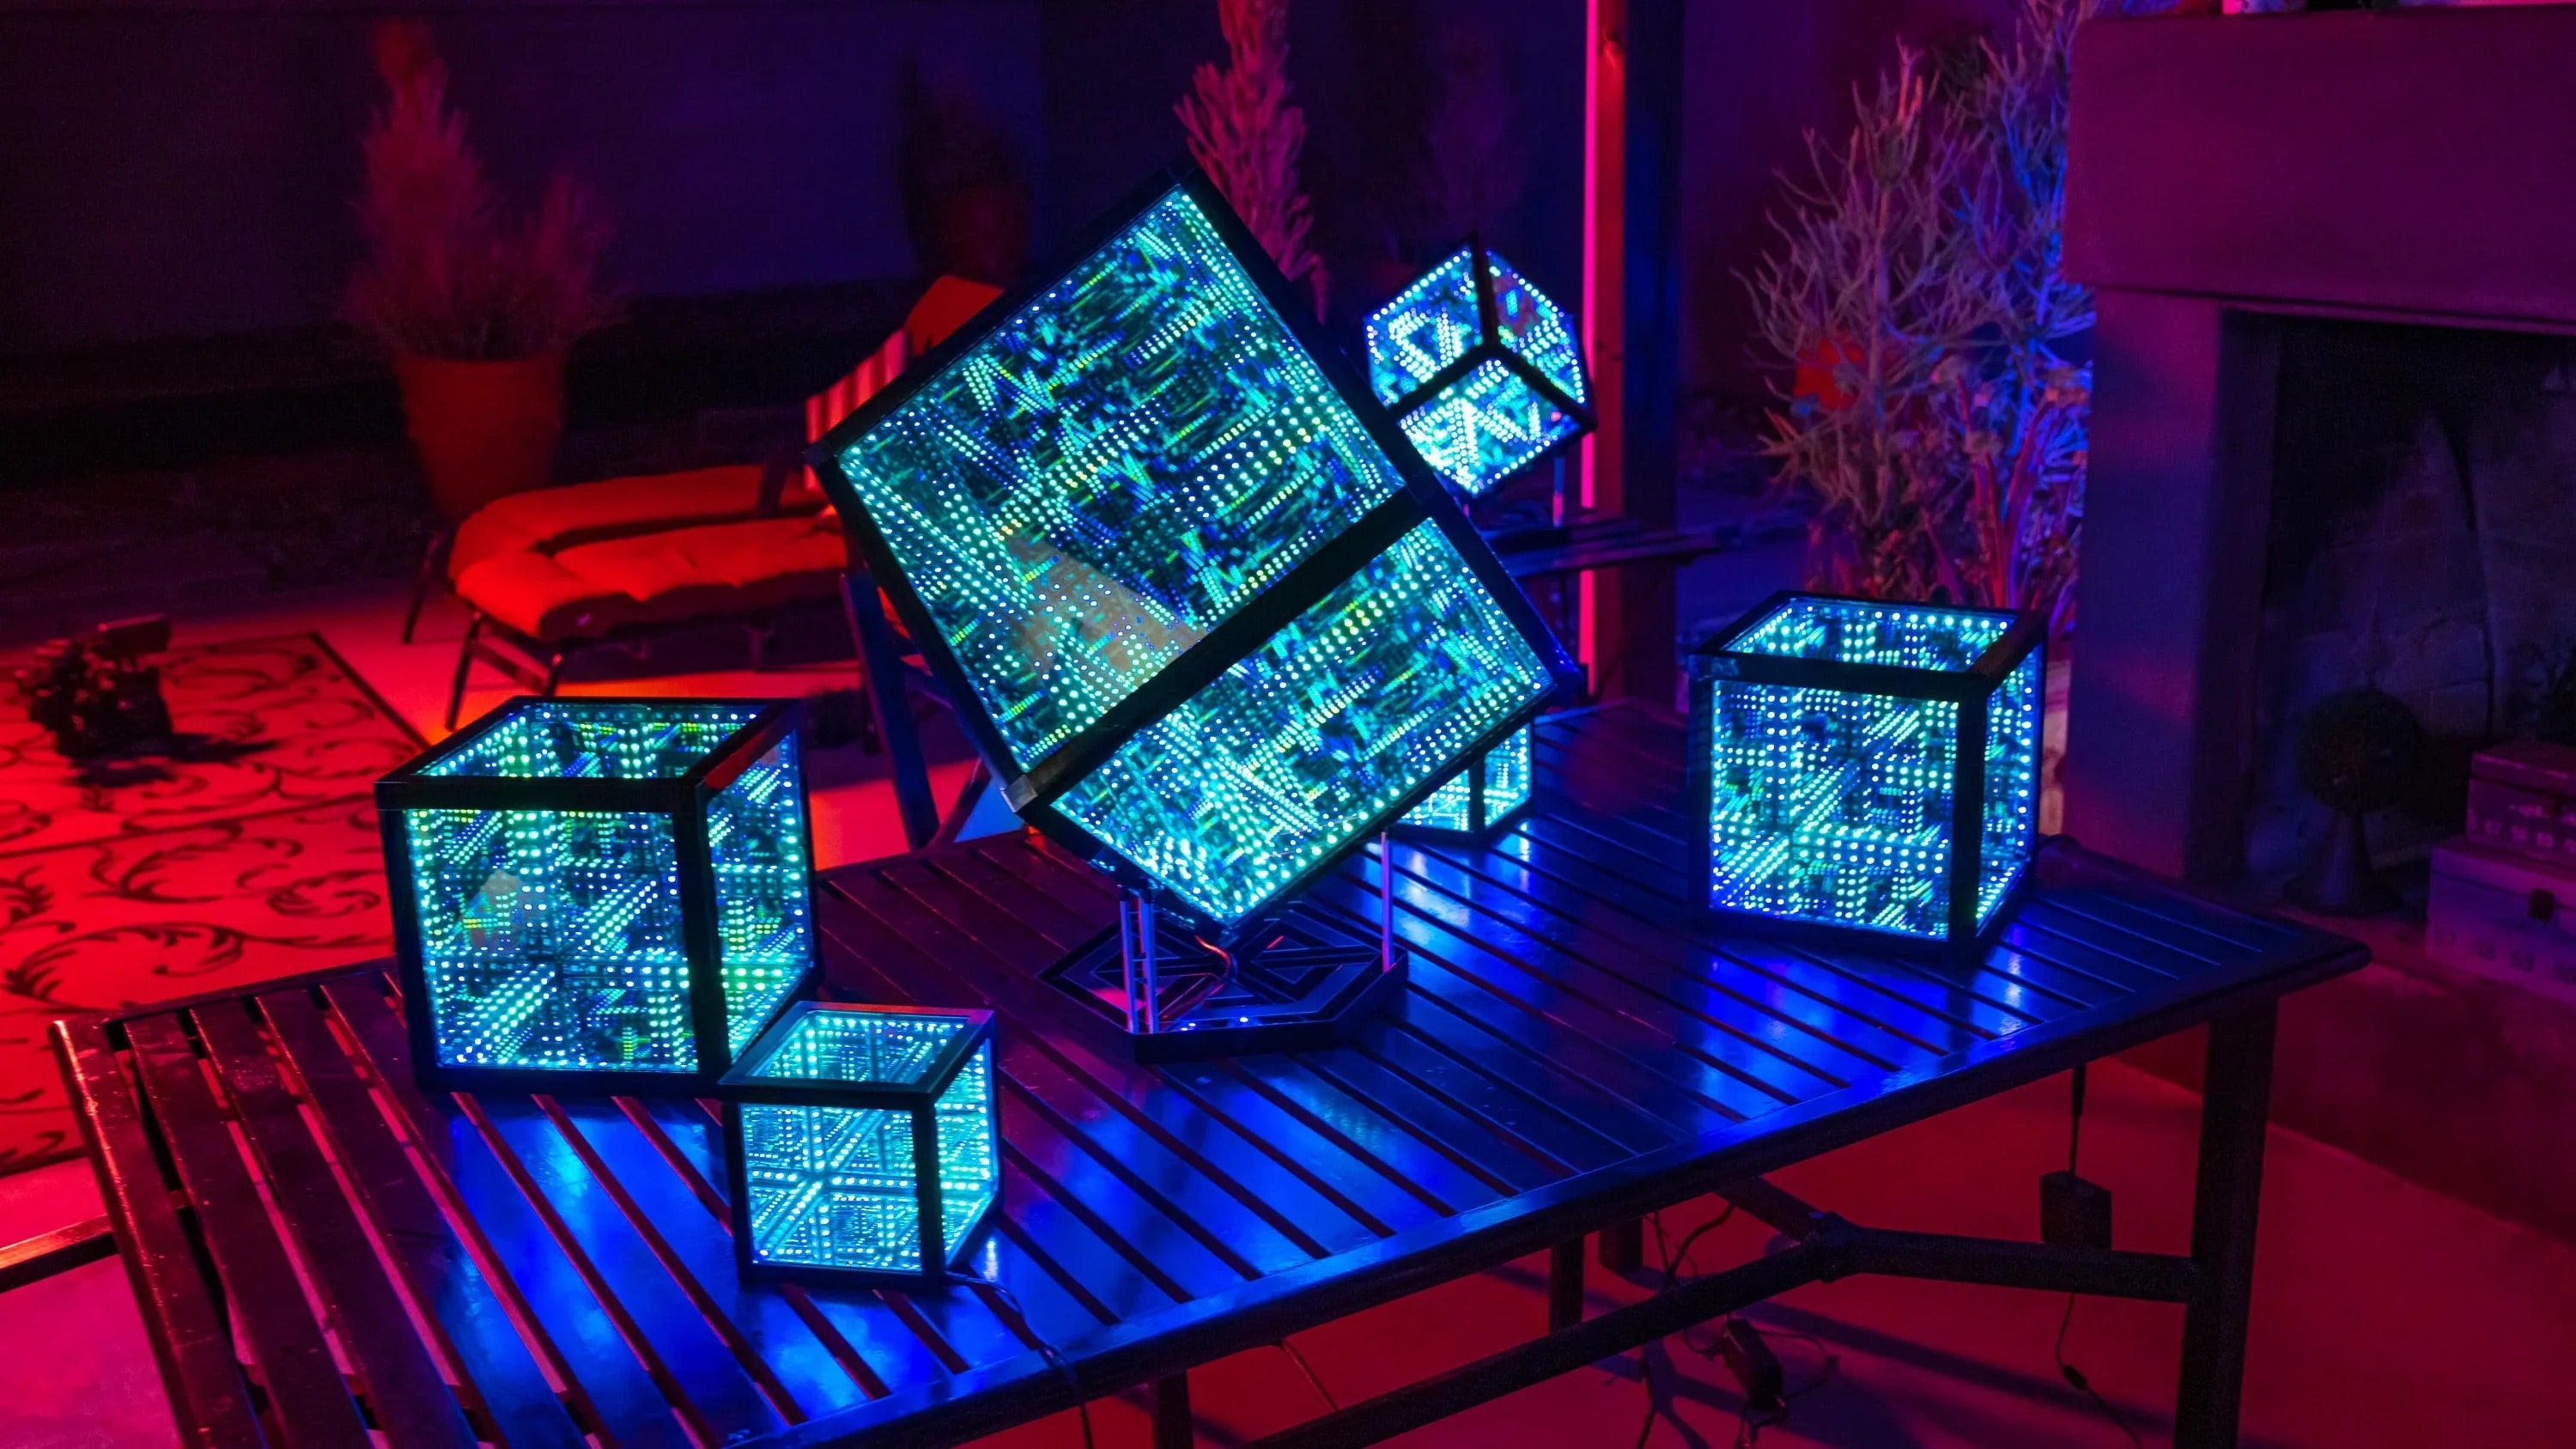 Five futuristic lighting solution cubes on a coffee table in a living room